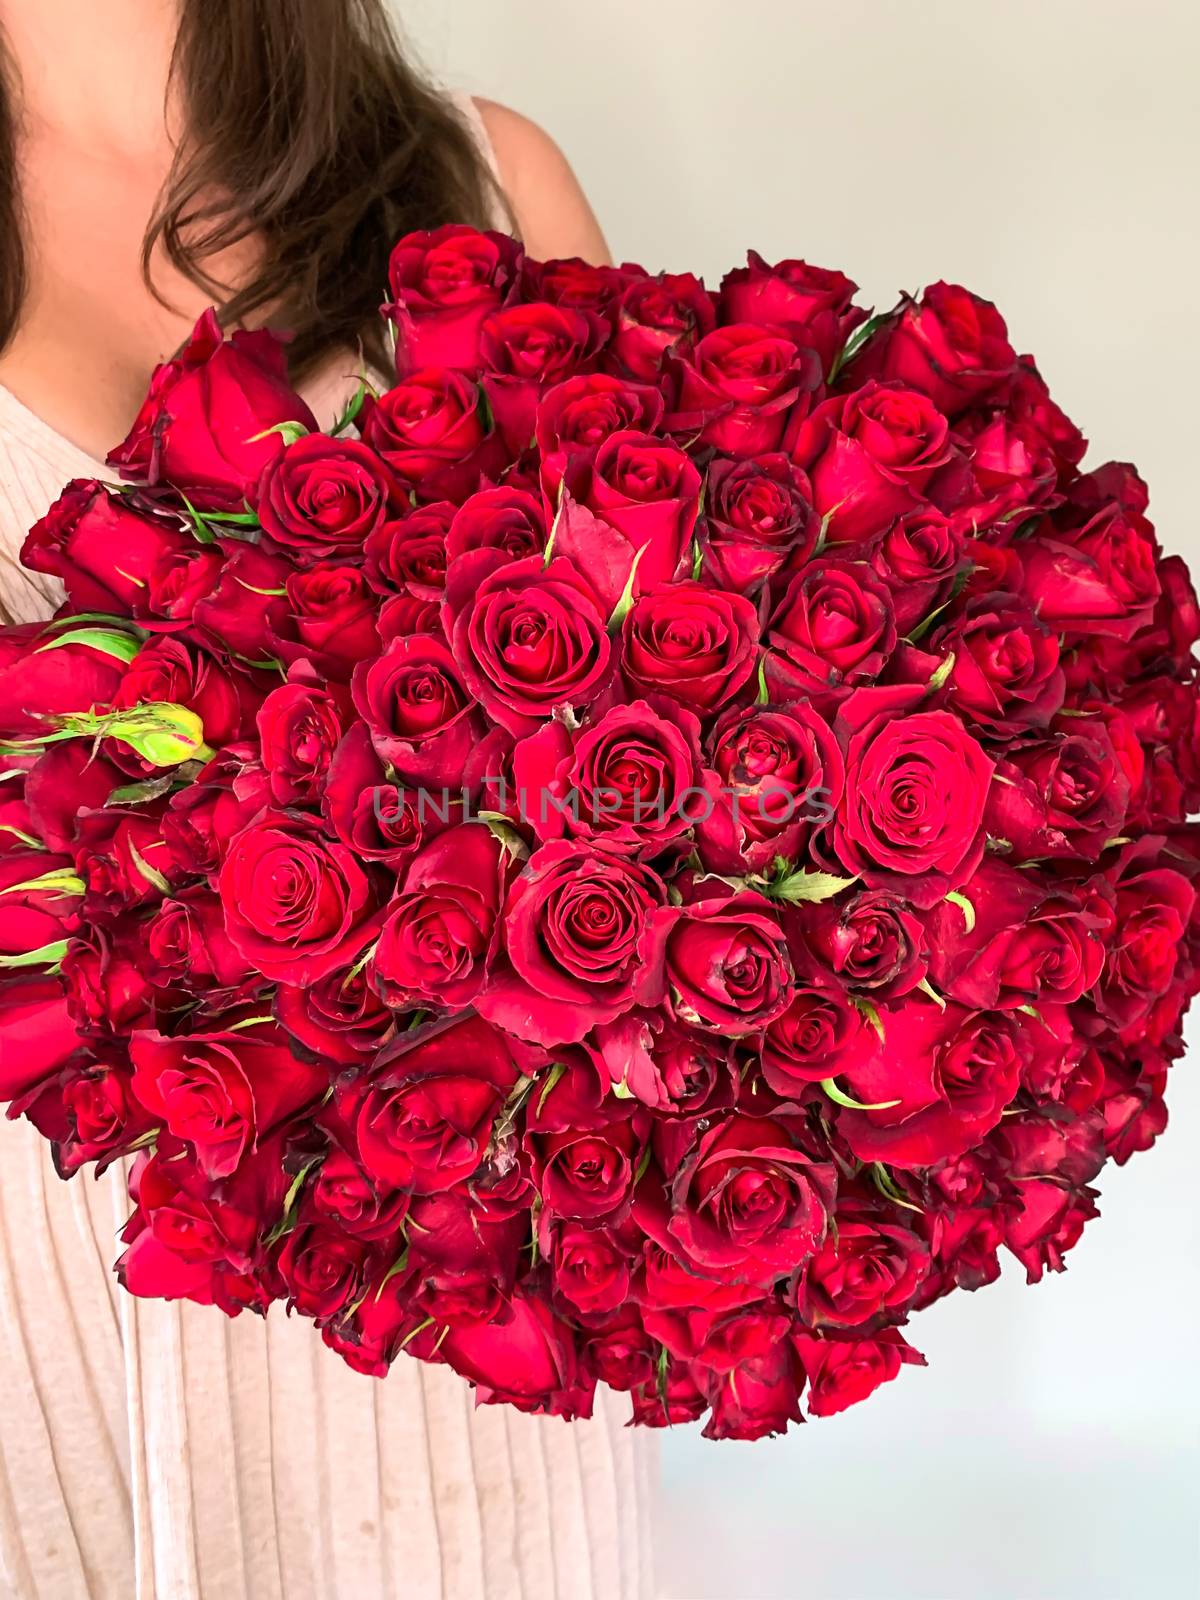 A young girl holding in hands a huge bouquet of 101 wonderful red roses. Front view